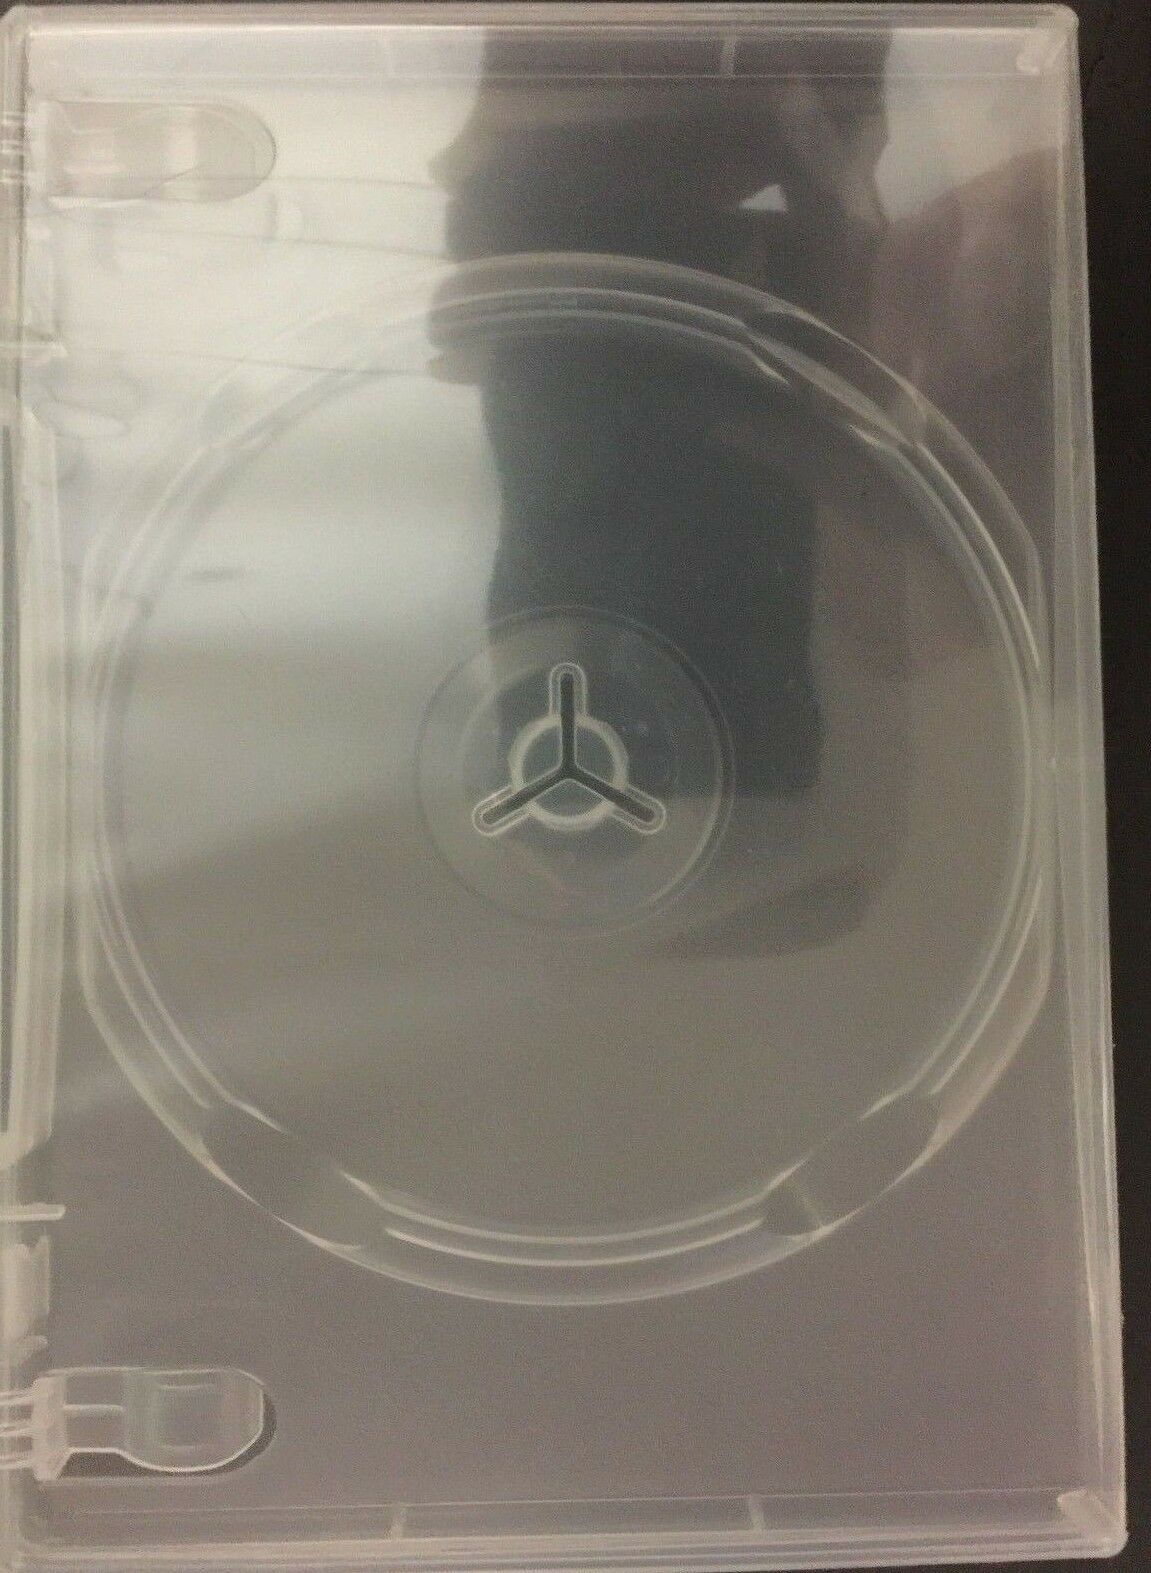 One New Clear, Premium Single Disc Dvd/cd/vg/pc Media, Keep Case 14mm (1/2")